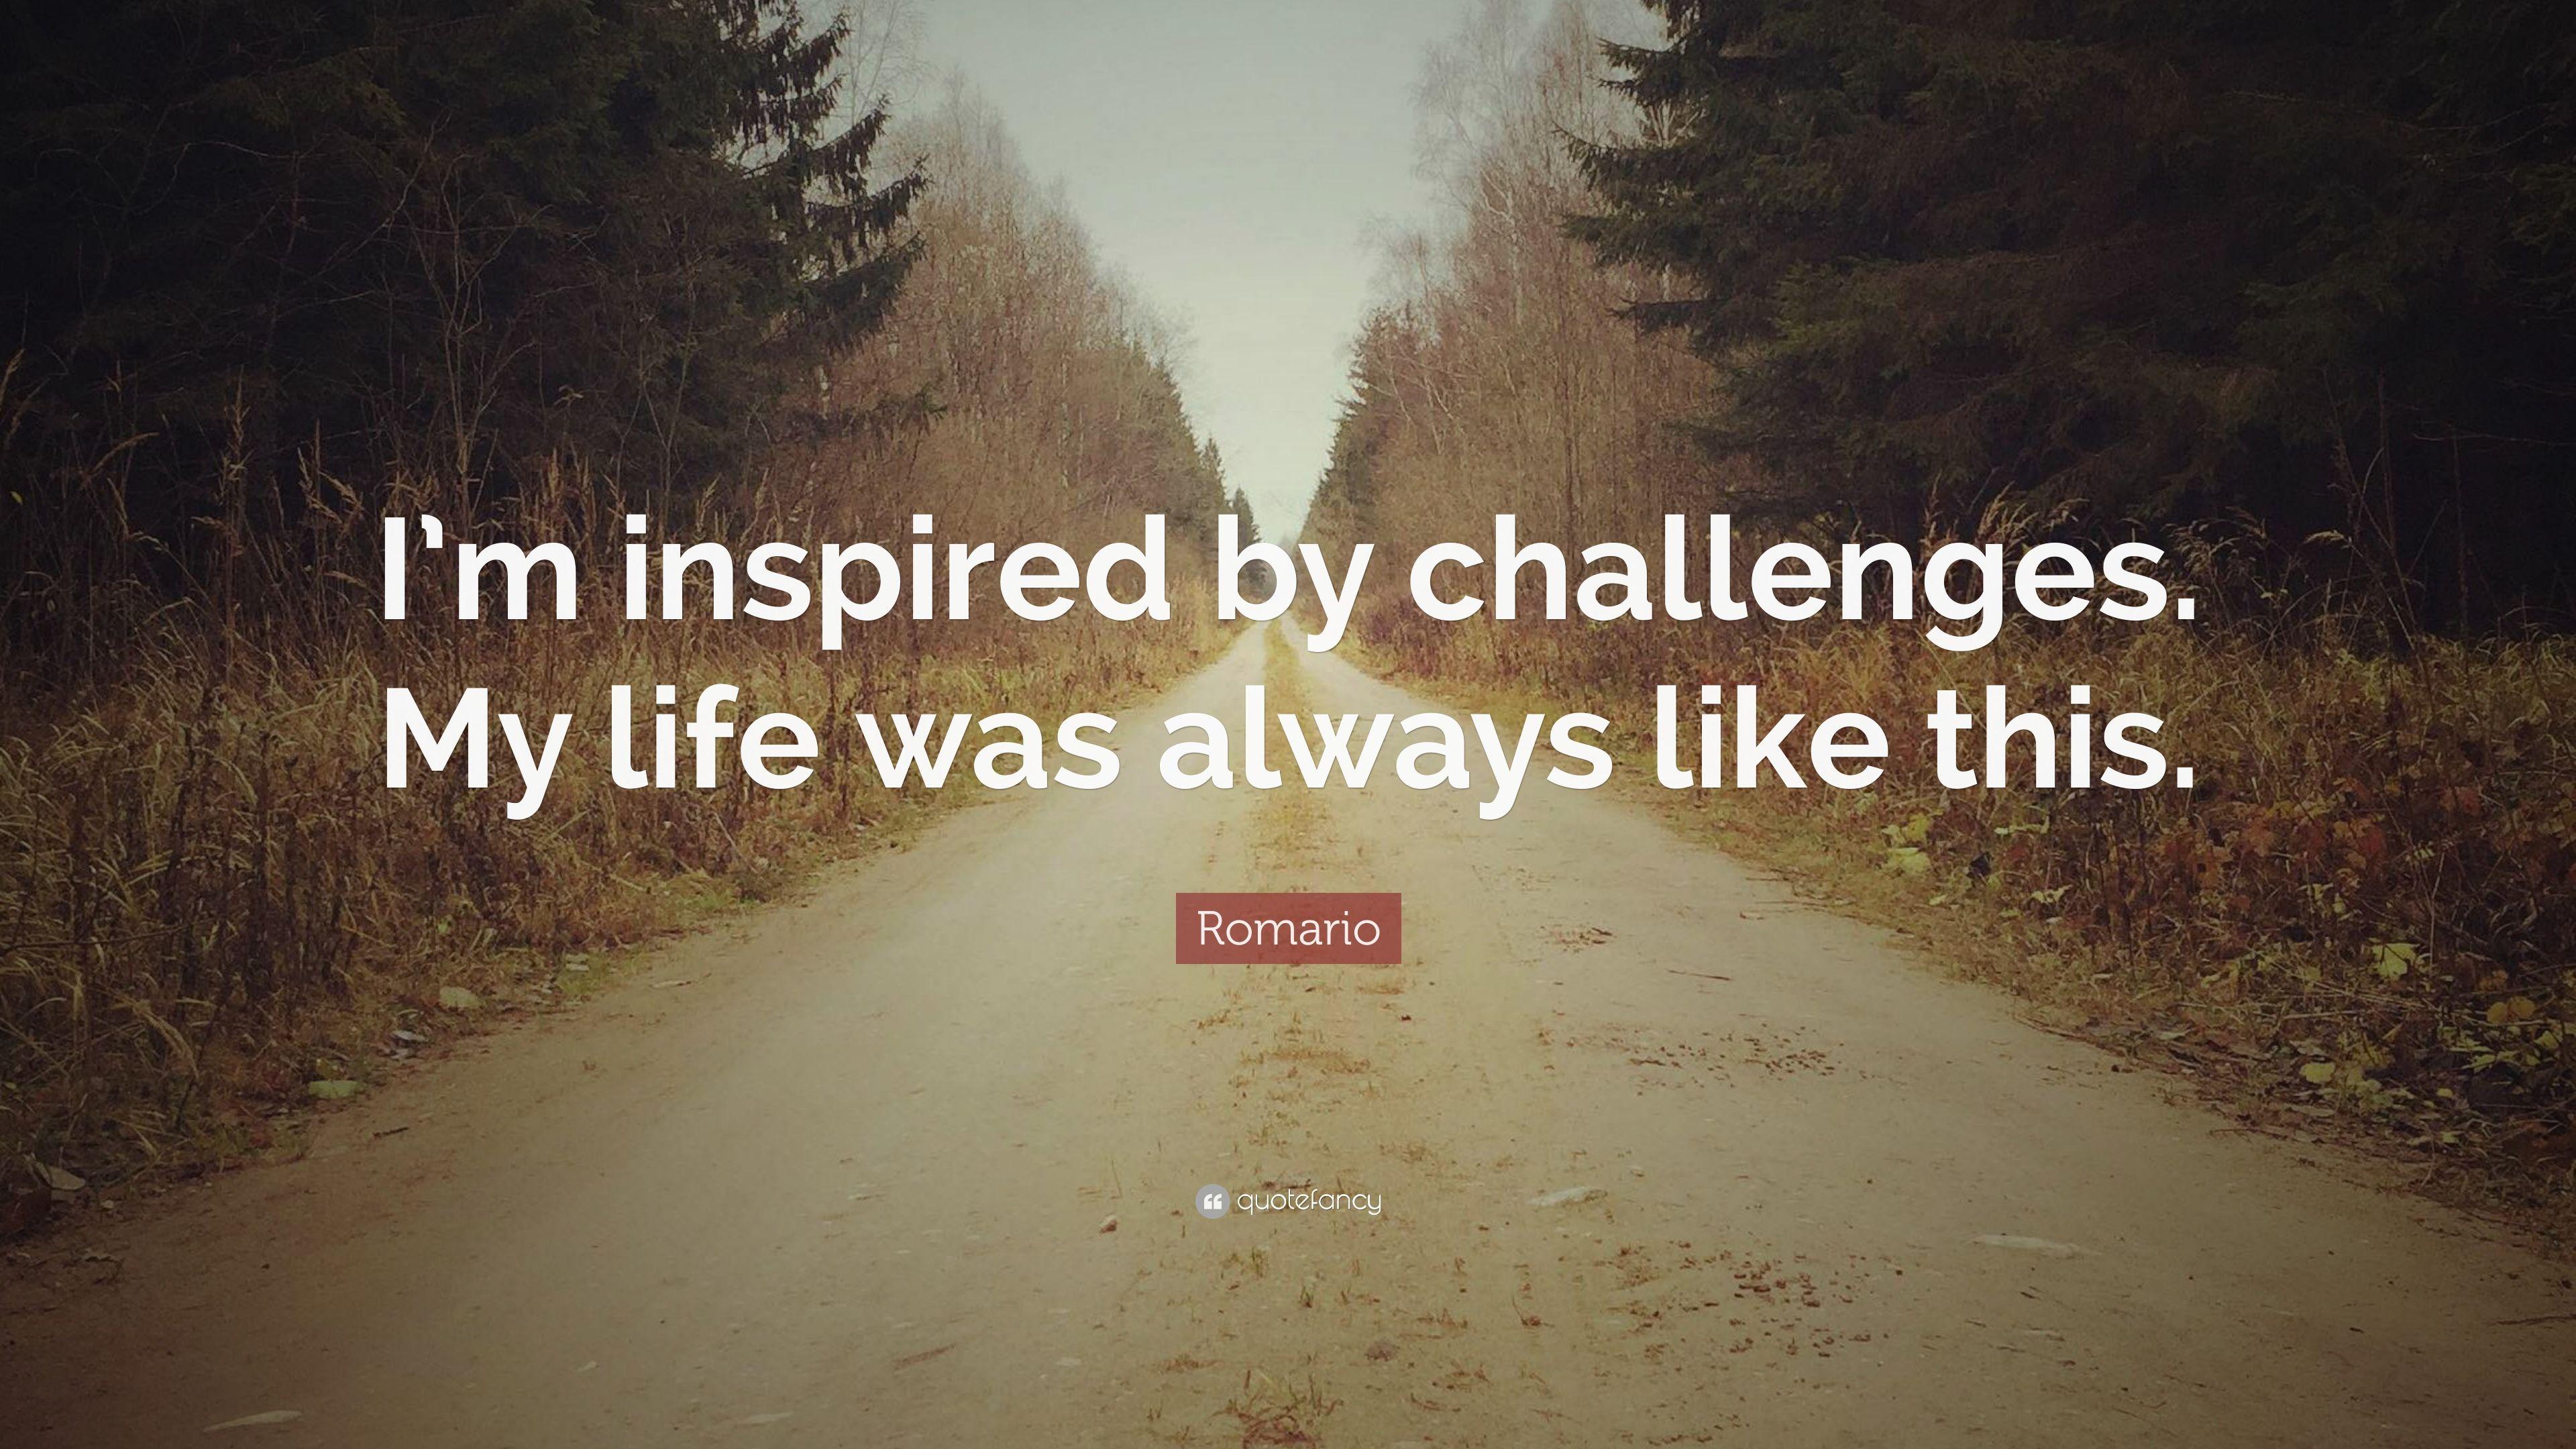 Romario Quote: “I'm inspired by challenges. My life was always like